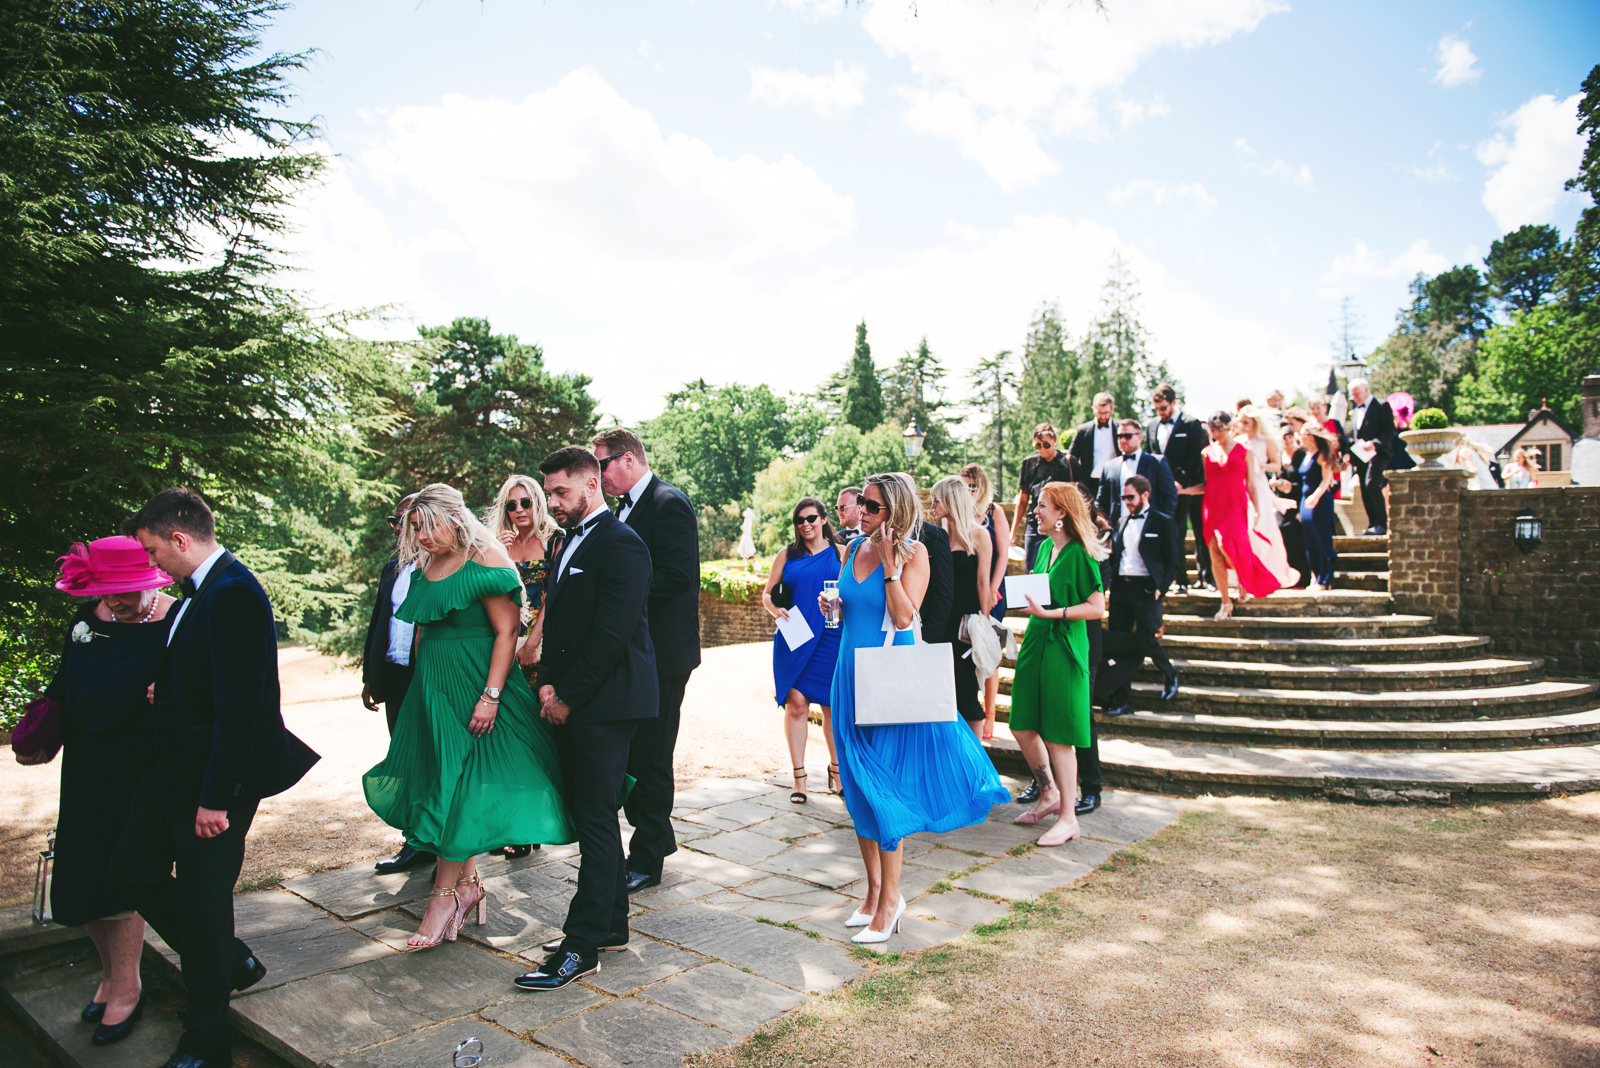 Wedding guests in colour dresses